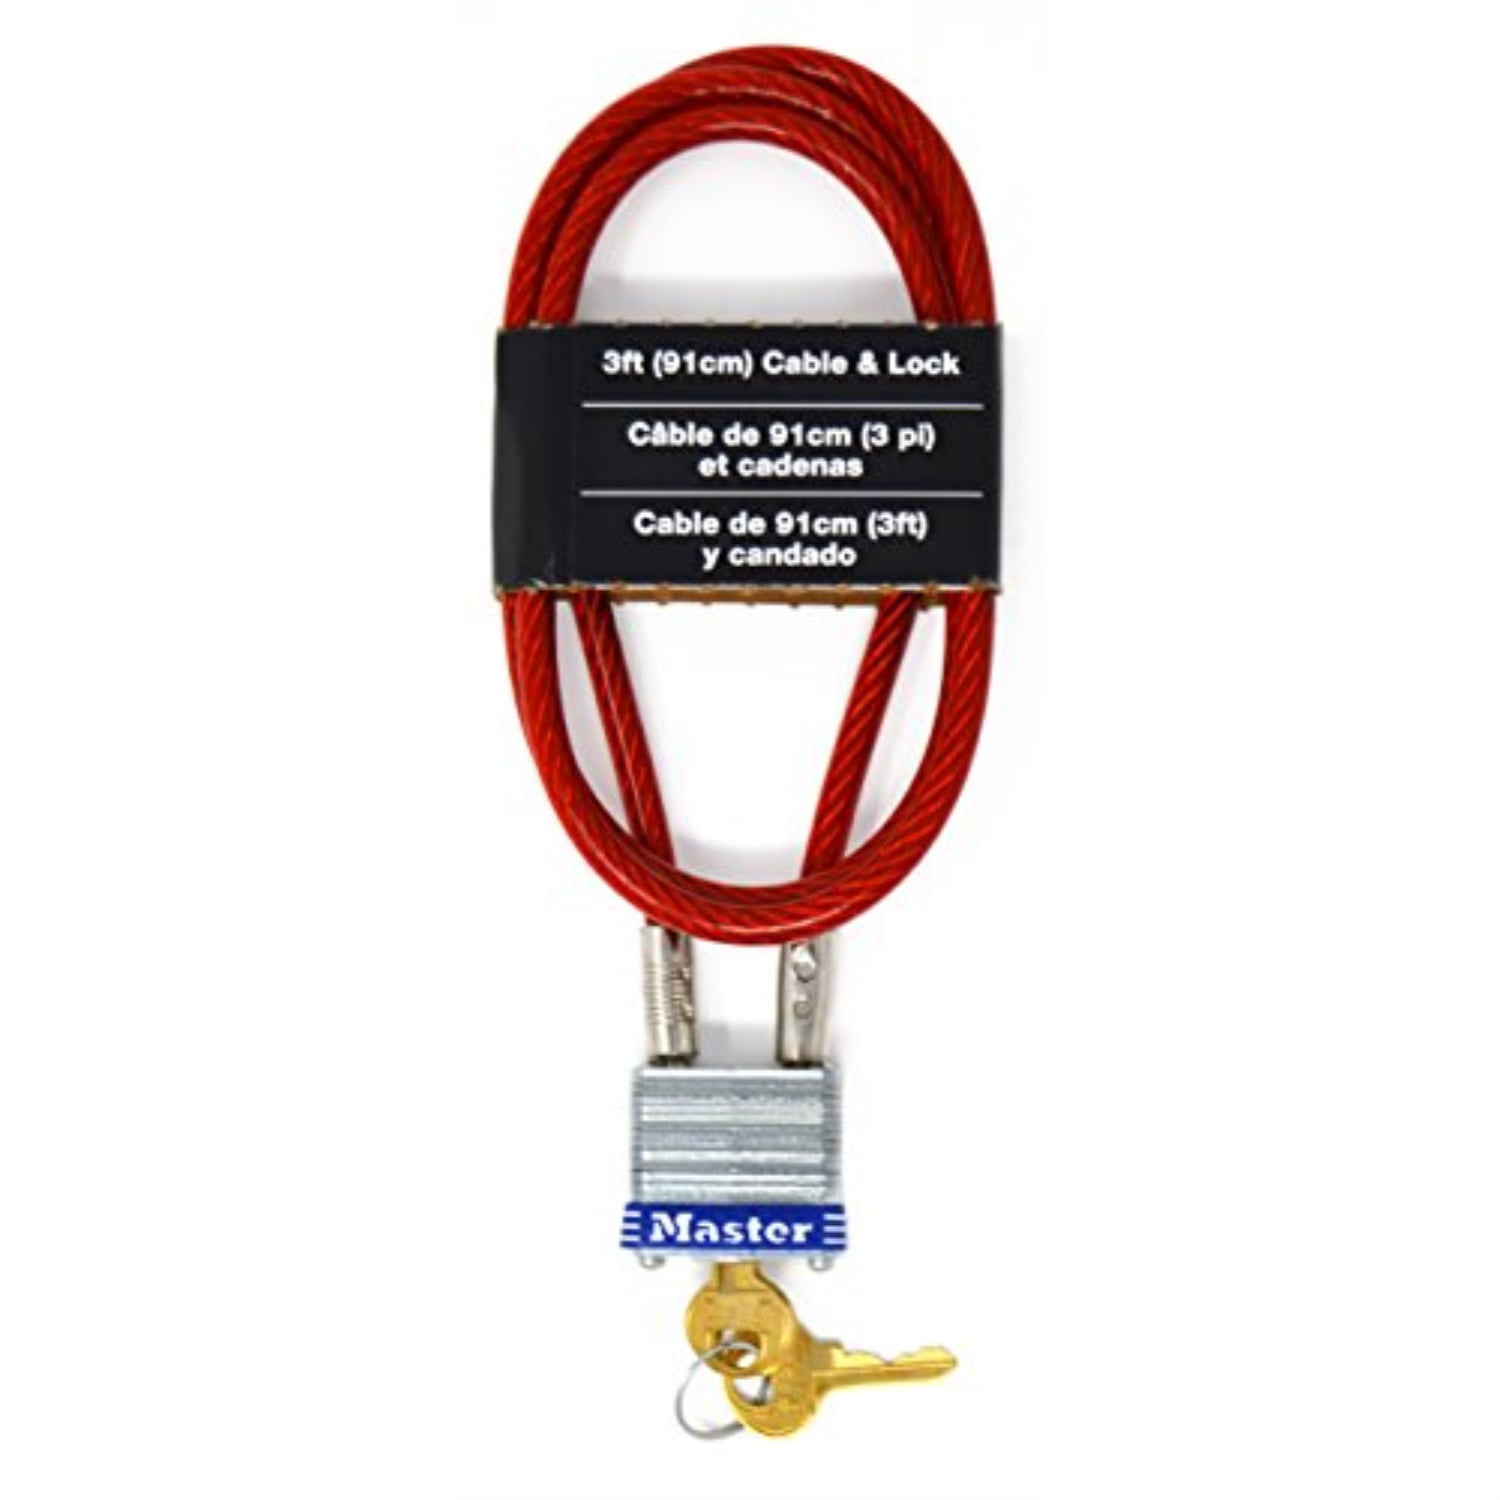 913611 Master Lock Fixed Length Cable Locks, 6 ft. Cable Length, Braided  Steel, 3/8 Cable Diameter